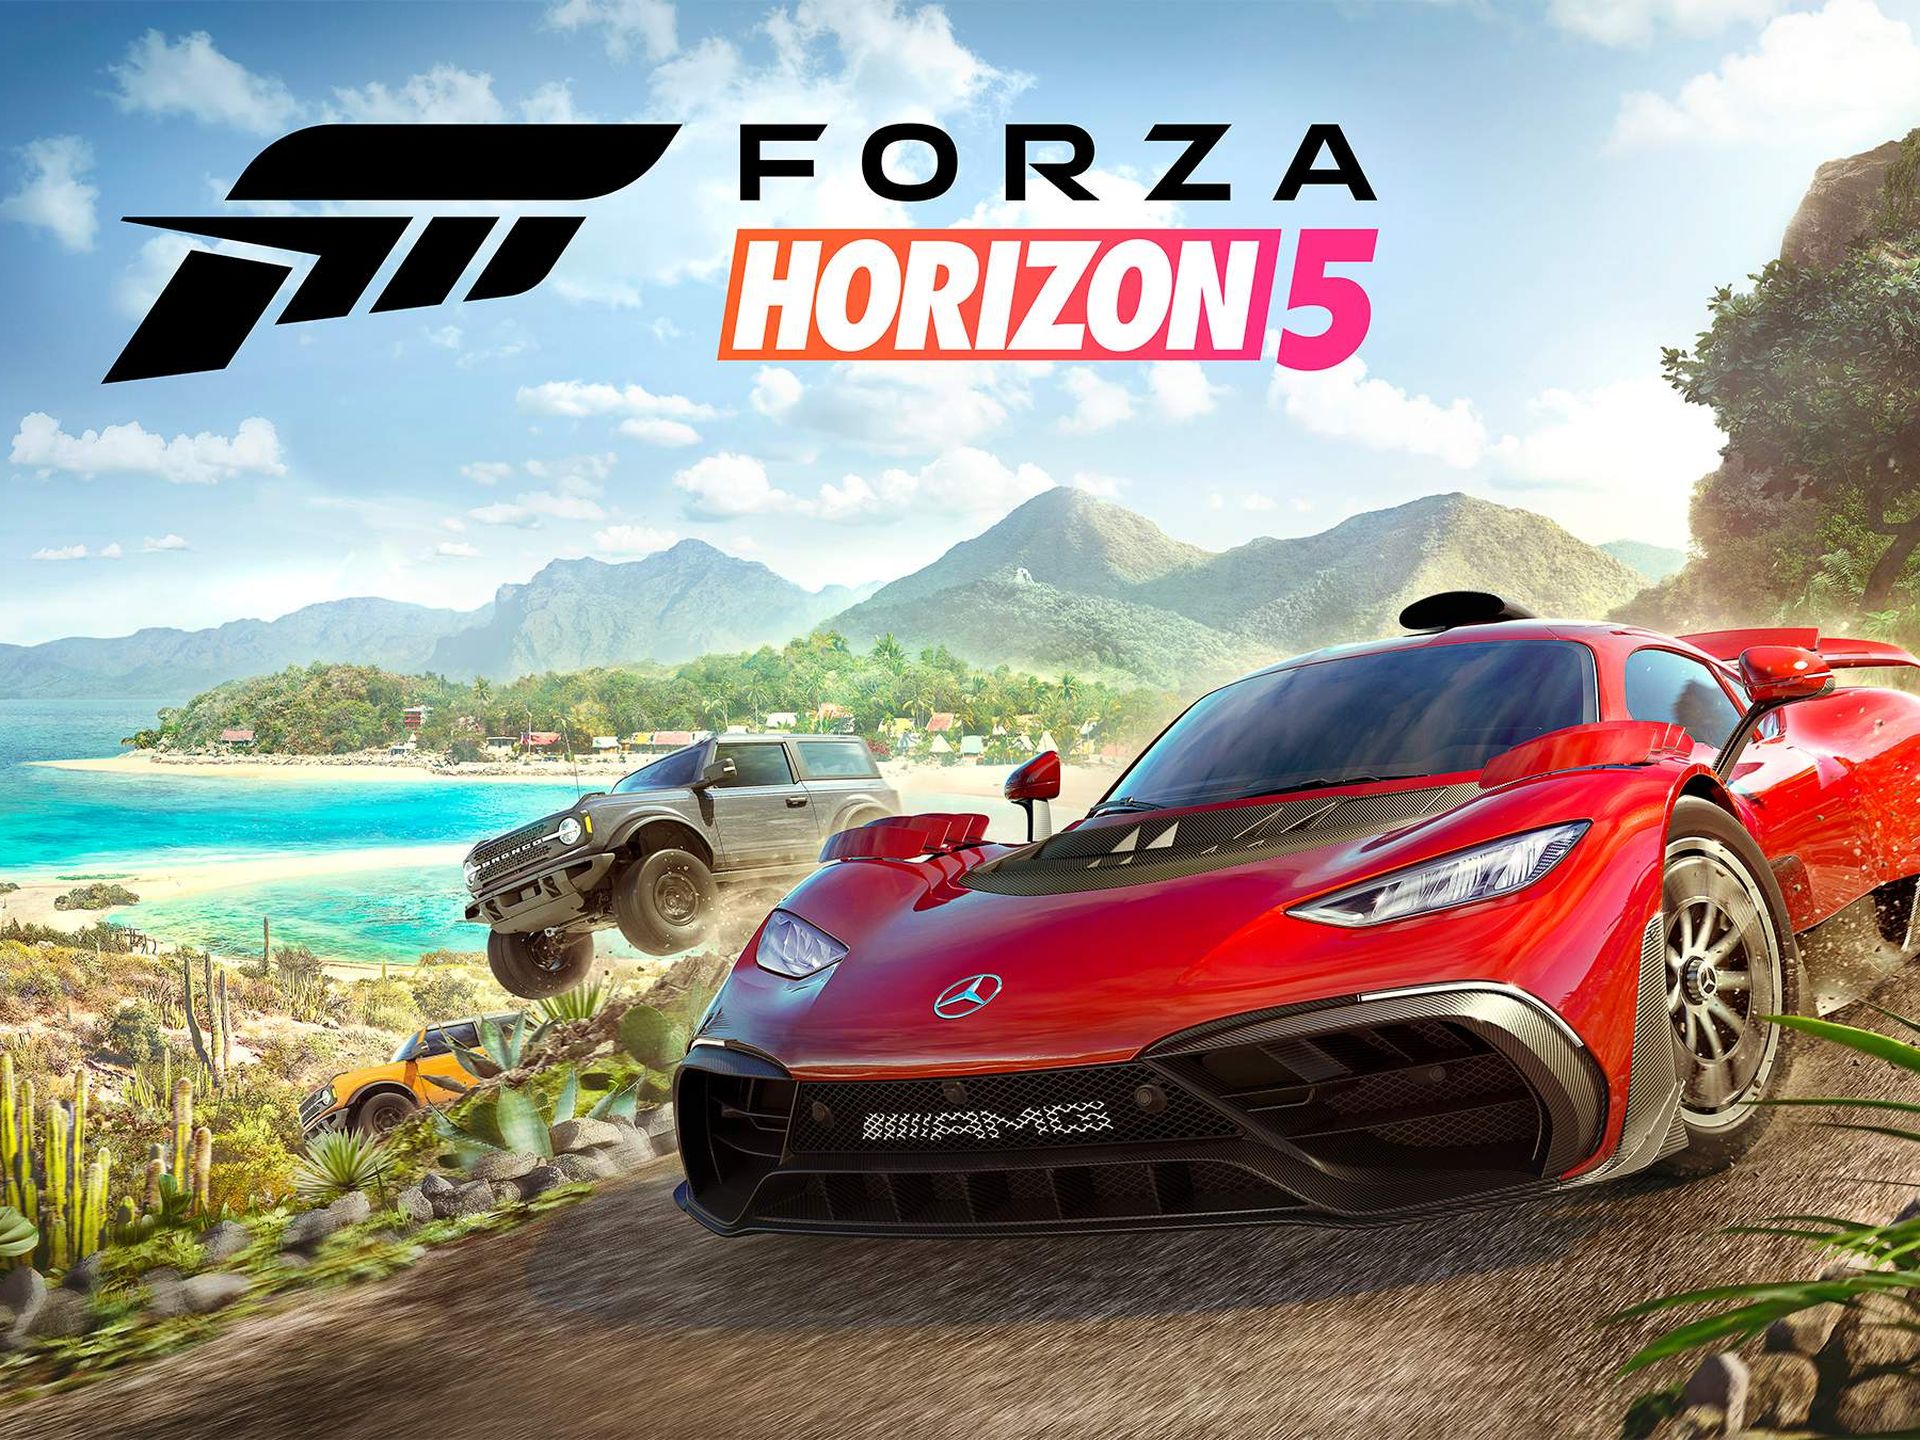 We all know Forza Horizon 5 (2021) will takes place in Mexico, so what  country would you expect Forza Horizon 6 (2024) will takes place in? I  would expect Forza Horizon 6 (